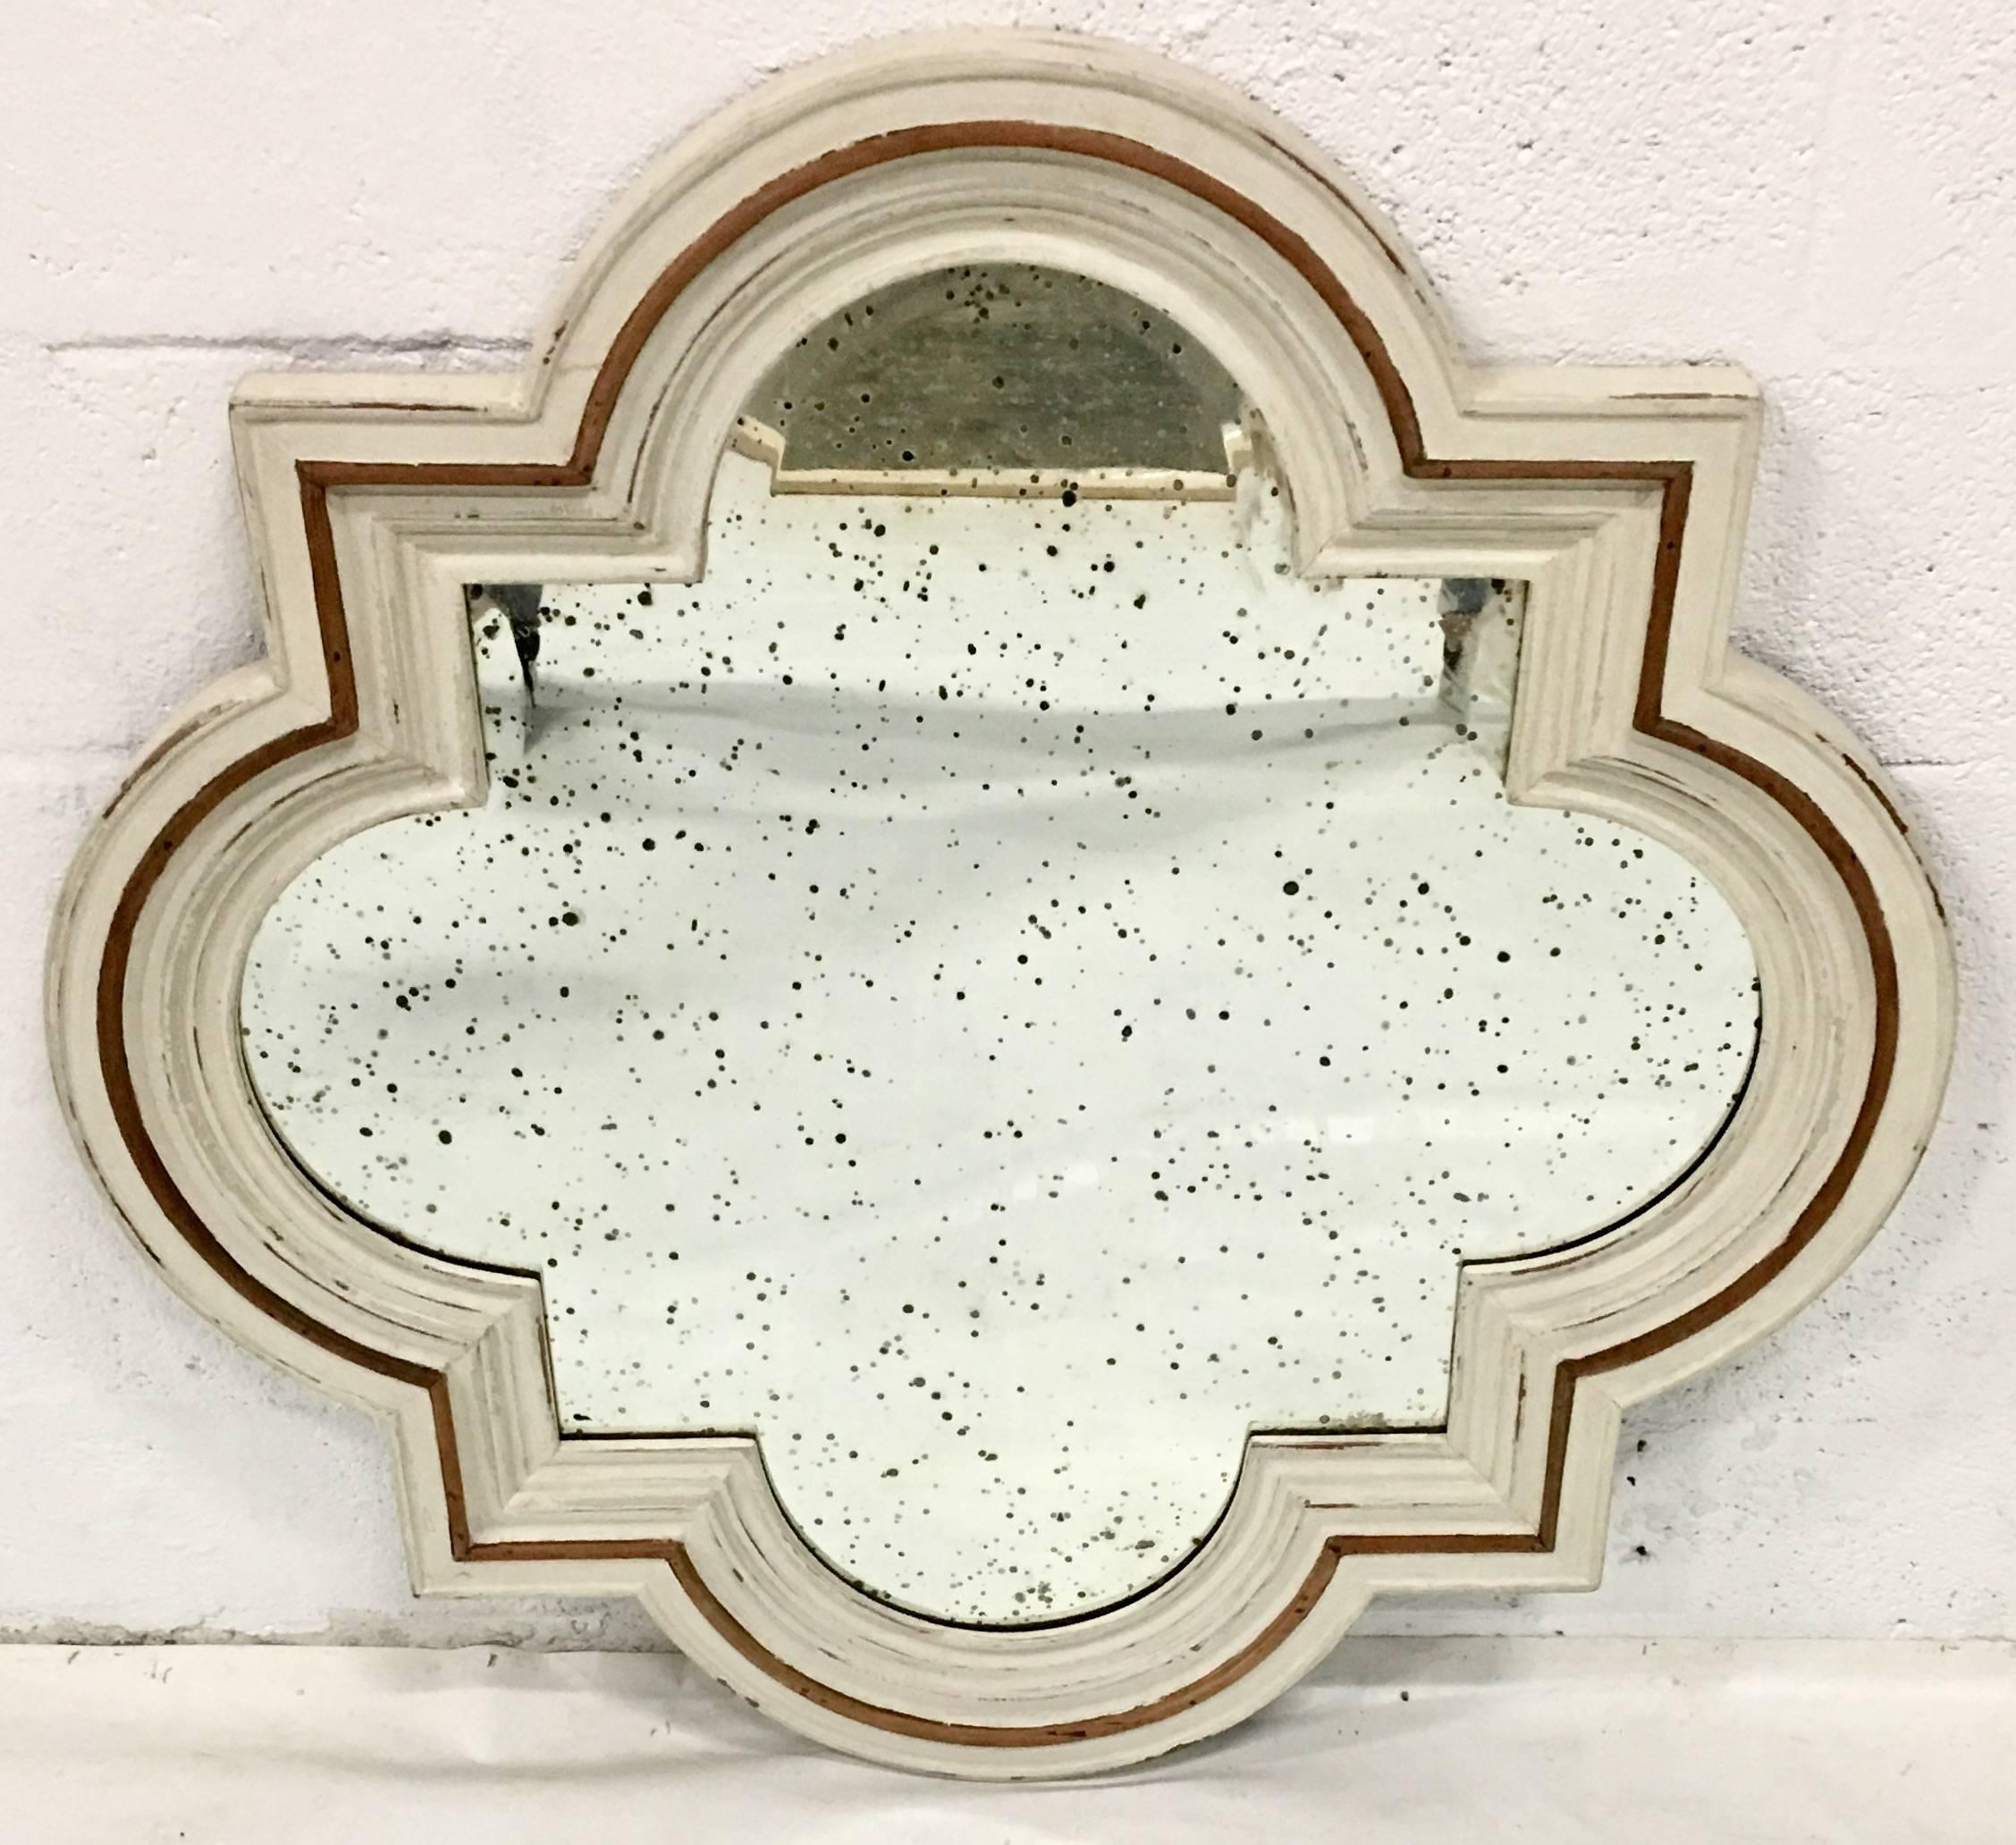 Vintage Italian carved and painted wood with raised applied detail quatrefoil antiqued glass mirror. Painted in off-white and terracotta.